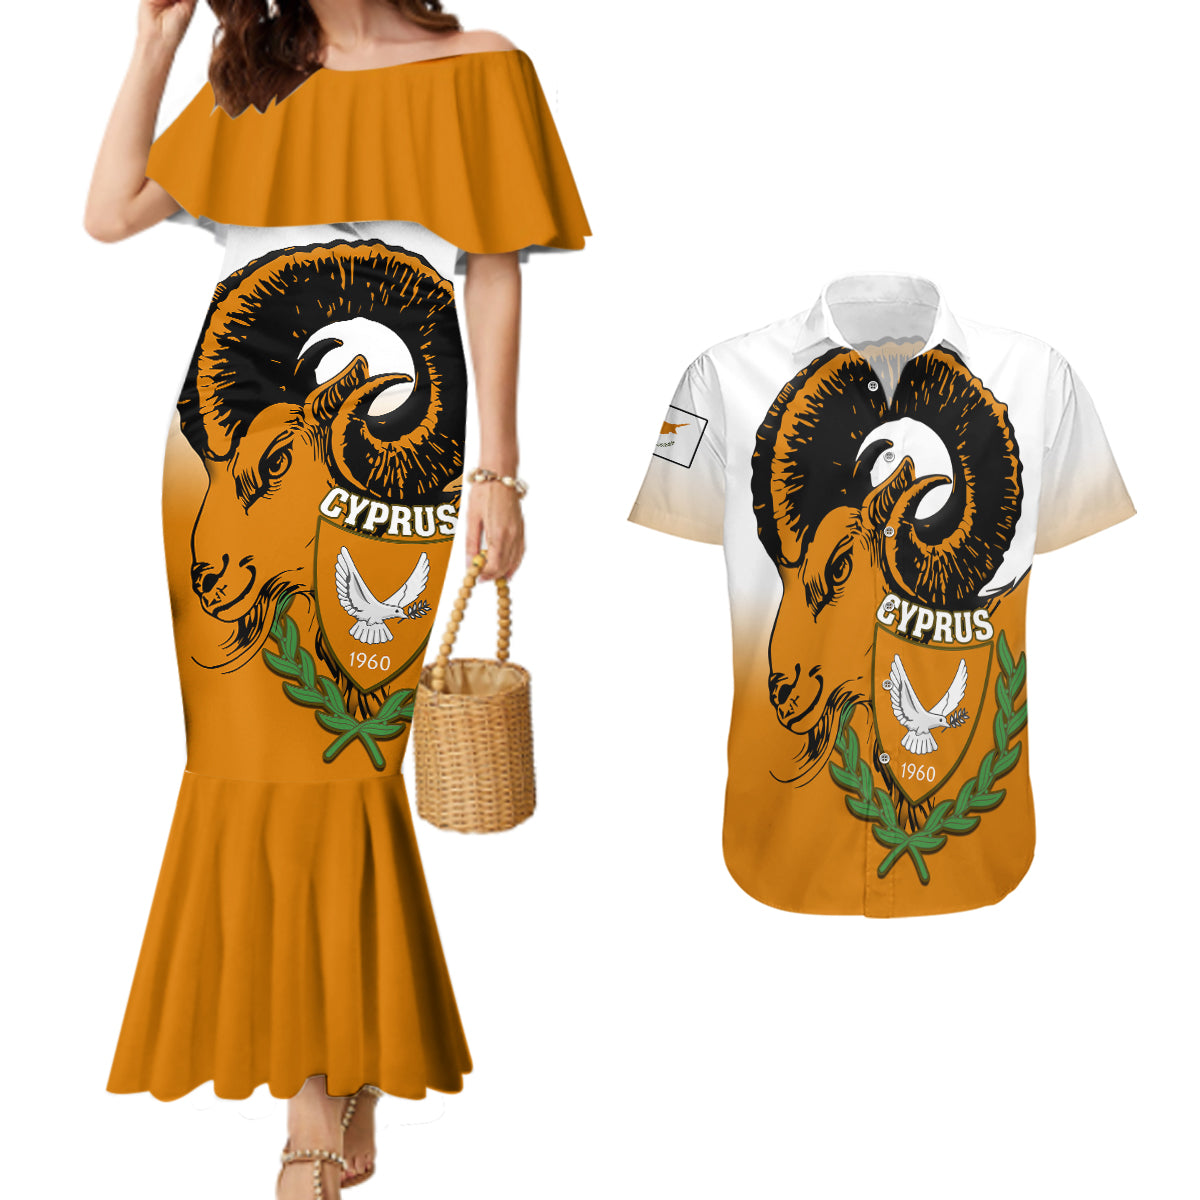 cyprus-independence-day-couples-matching-mermaid-dress-and-hawaiian-shirt-coat-of-arms-with-cypriot-mouflon-gradient-style